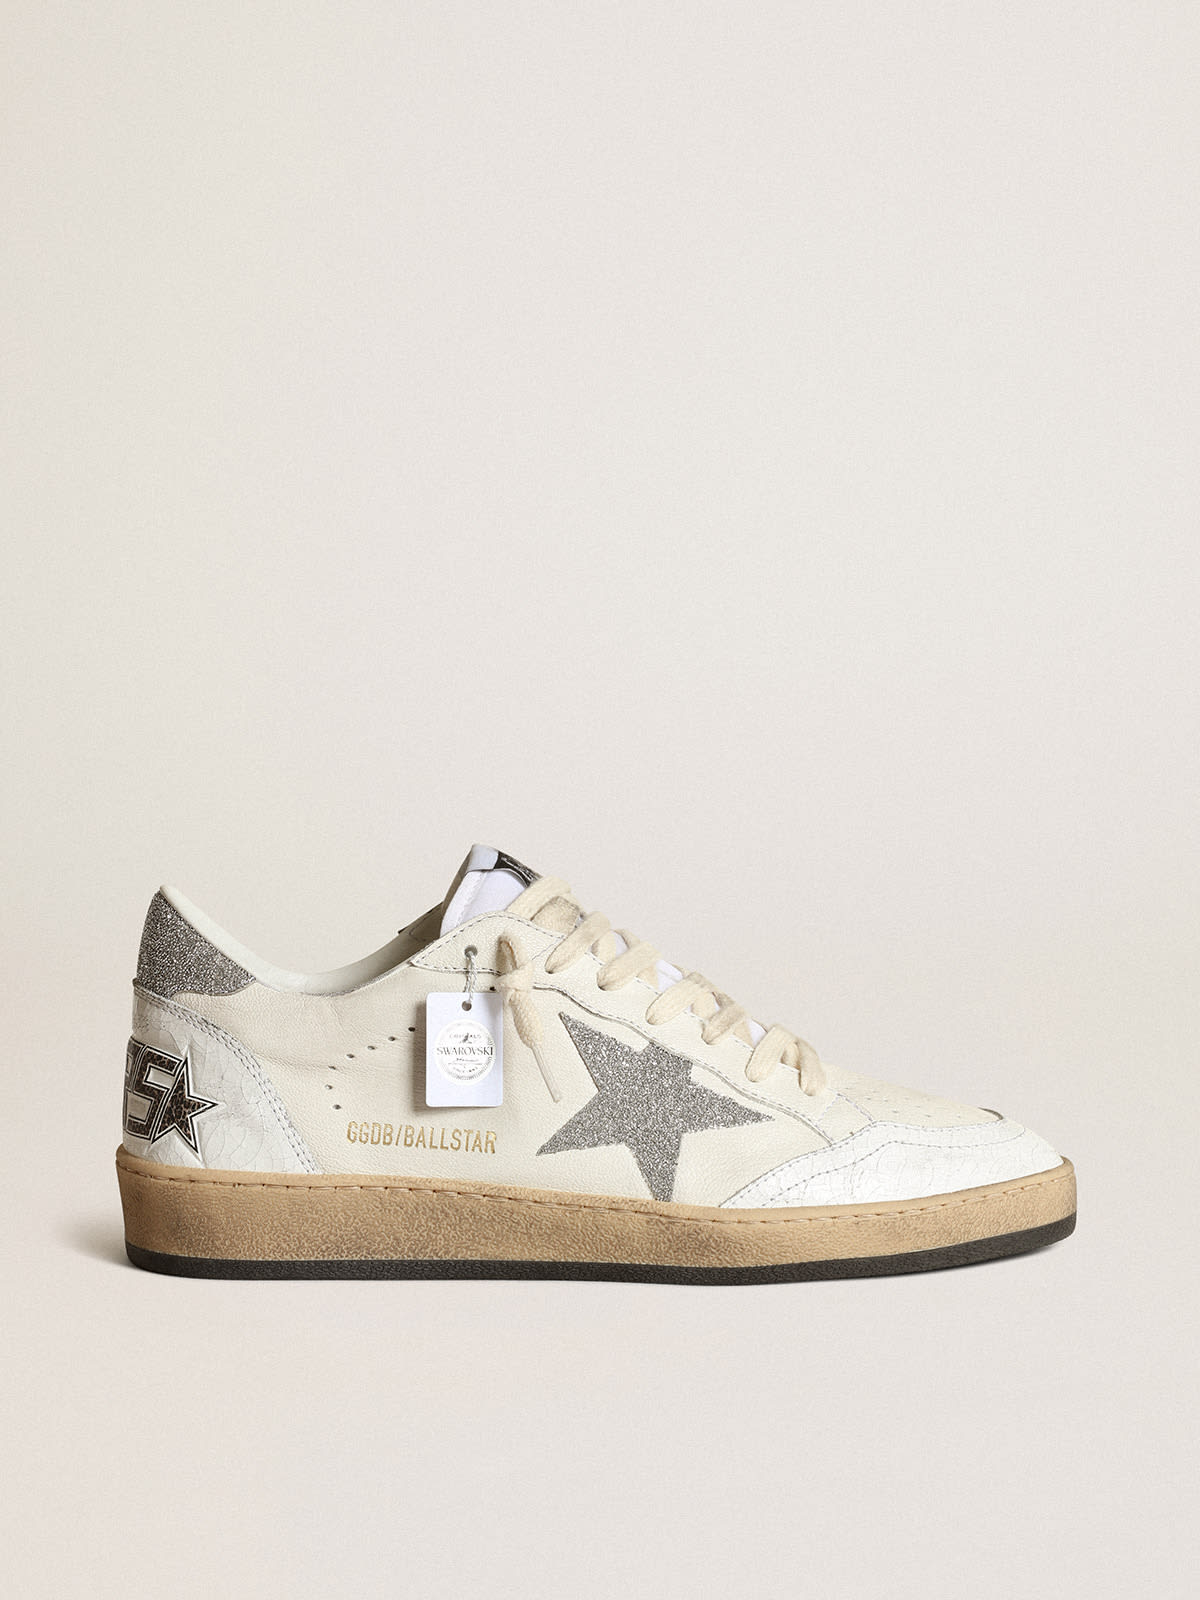 Nog steeds Politieagent Ambacht White Ball Star with a Swarovski crystal star and heel tab | Golden Goose